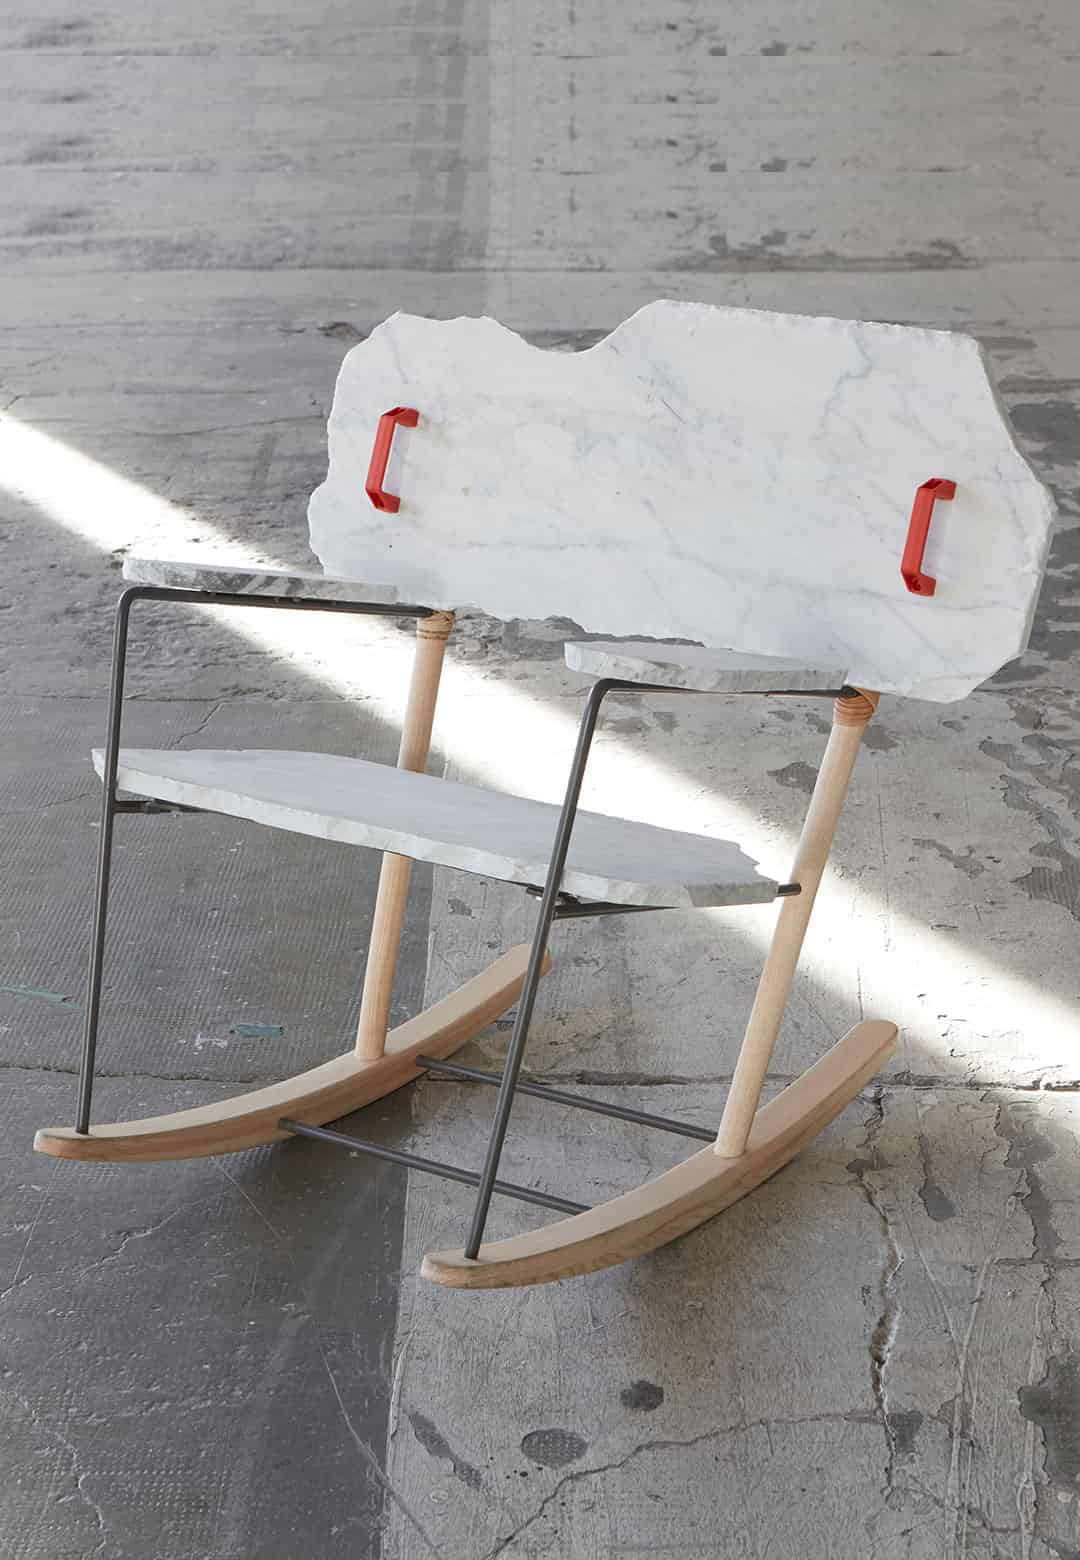 Parasite 2.0 designs furniture with salvaged materials from IKEA’s circular hub